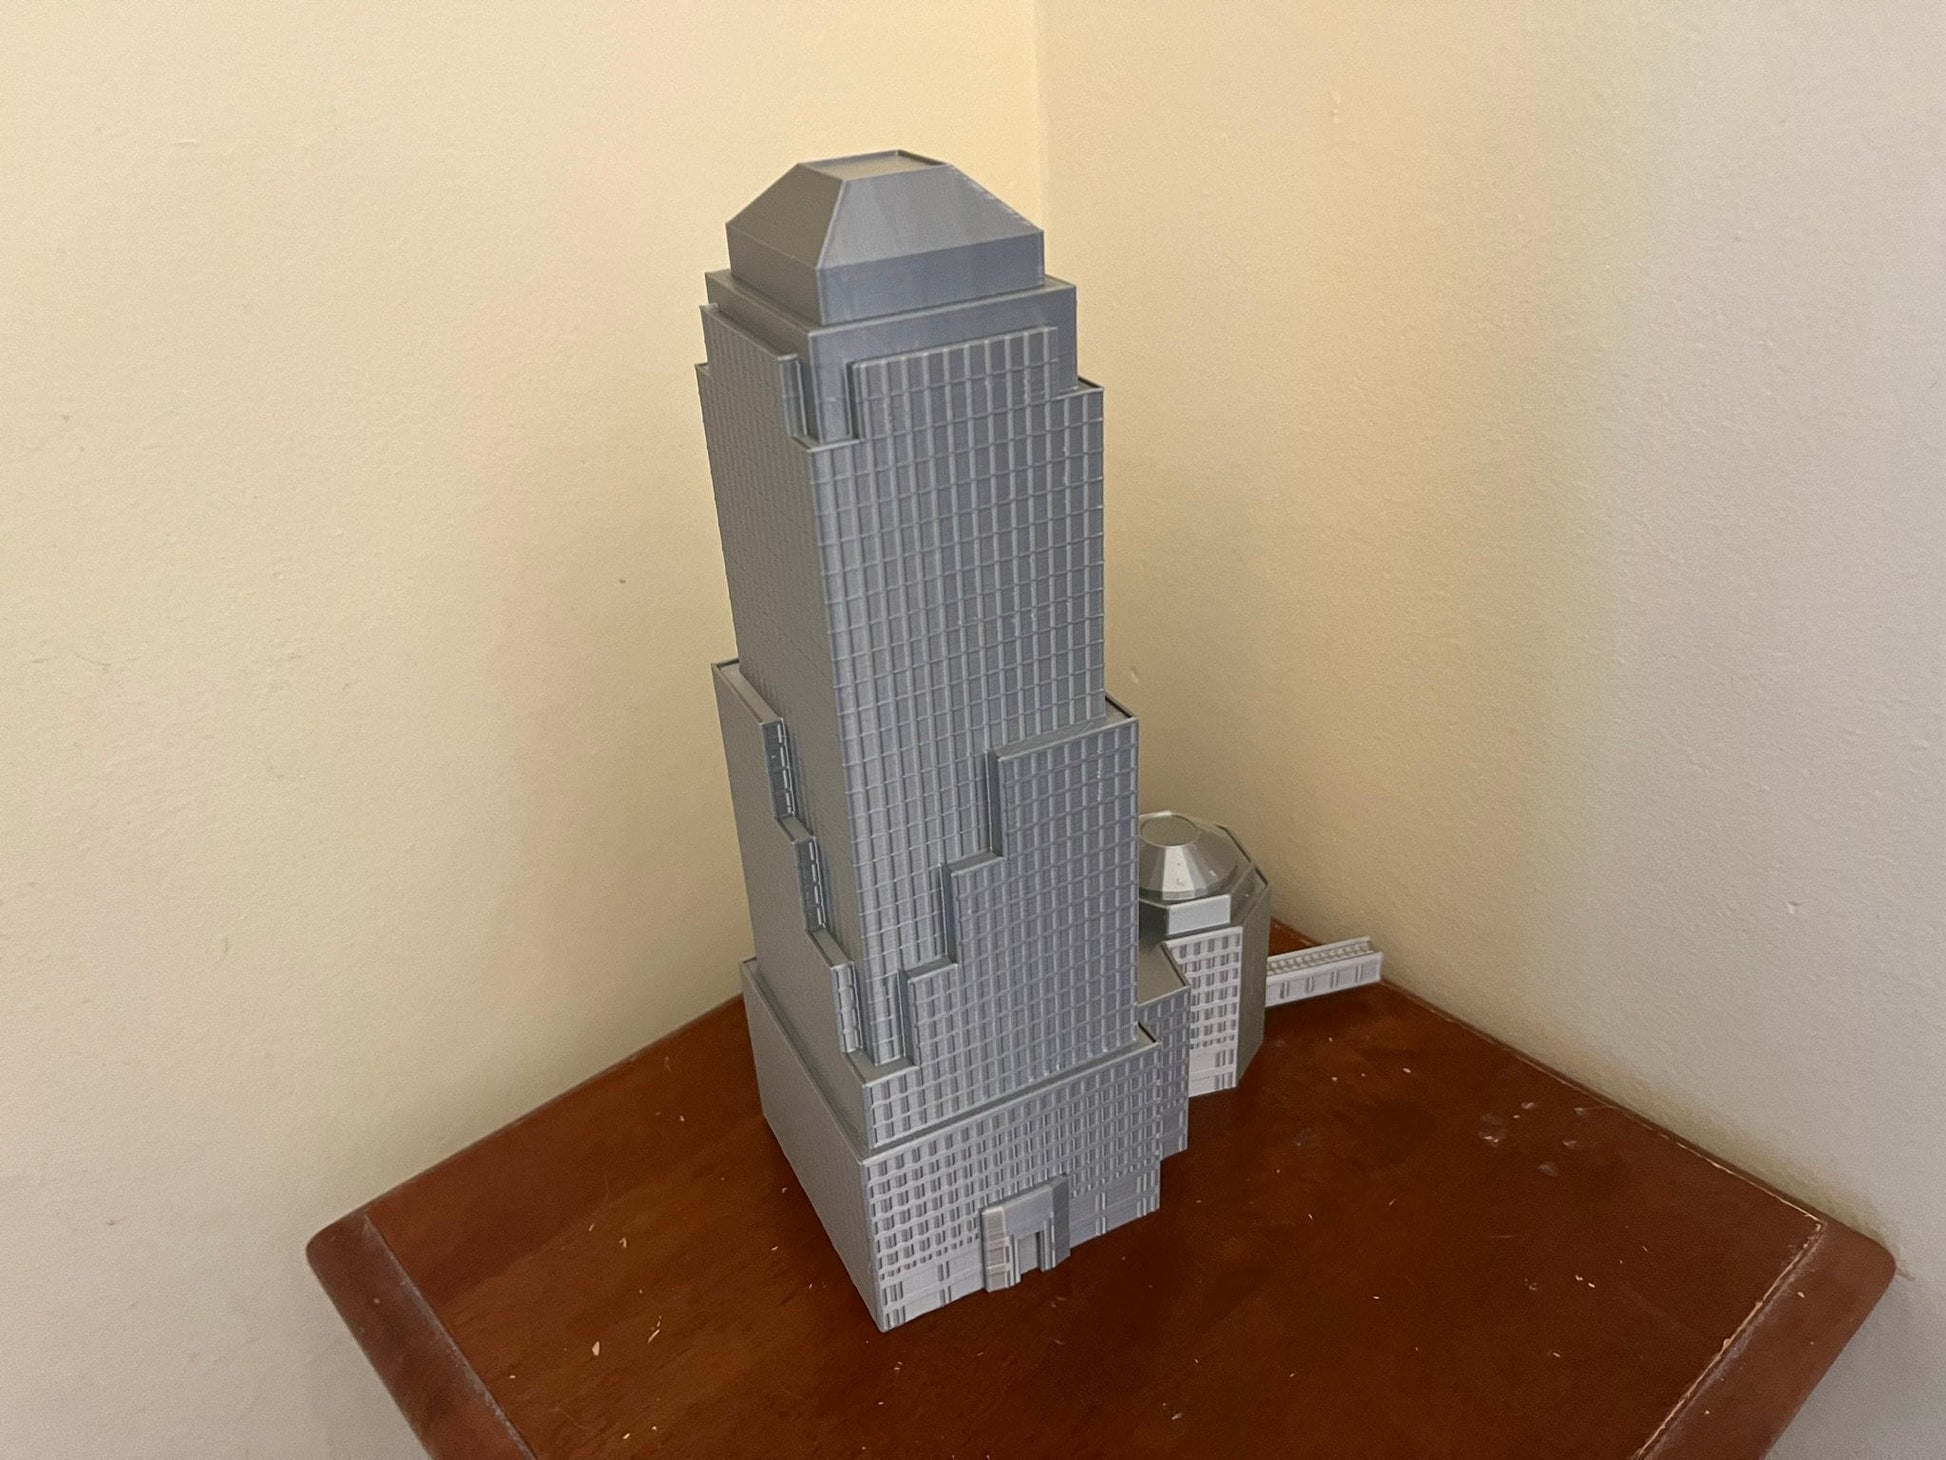 One World Financial Center Model- 3D Printed